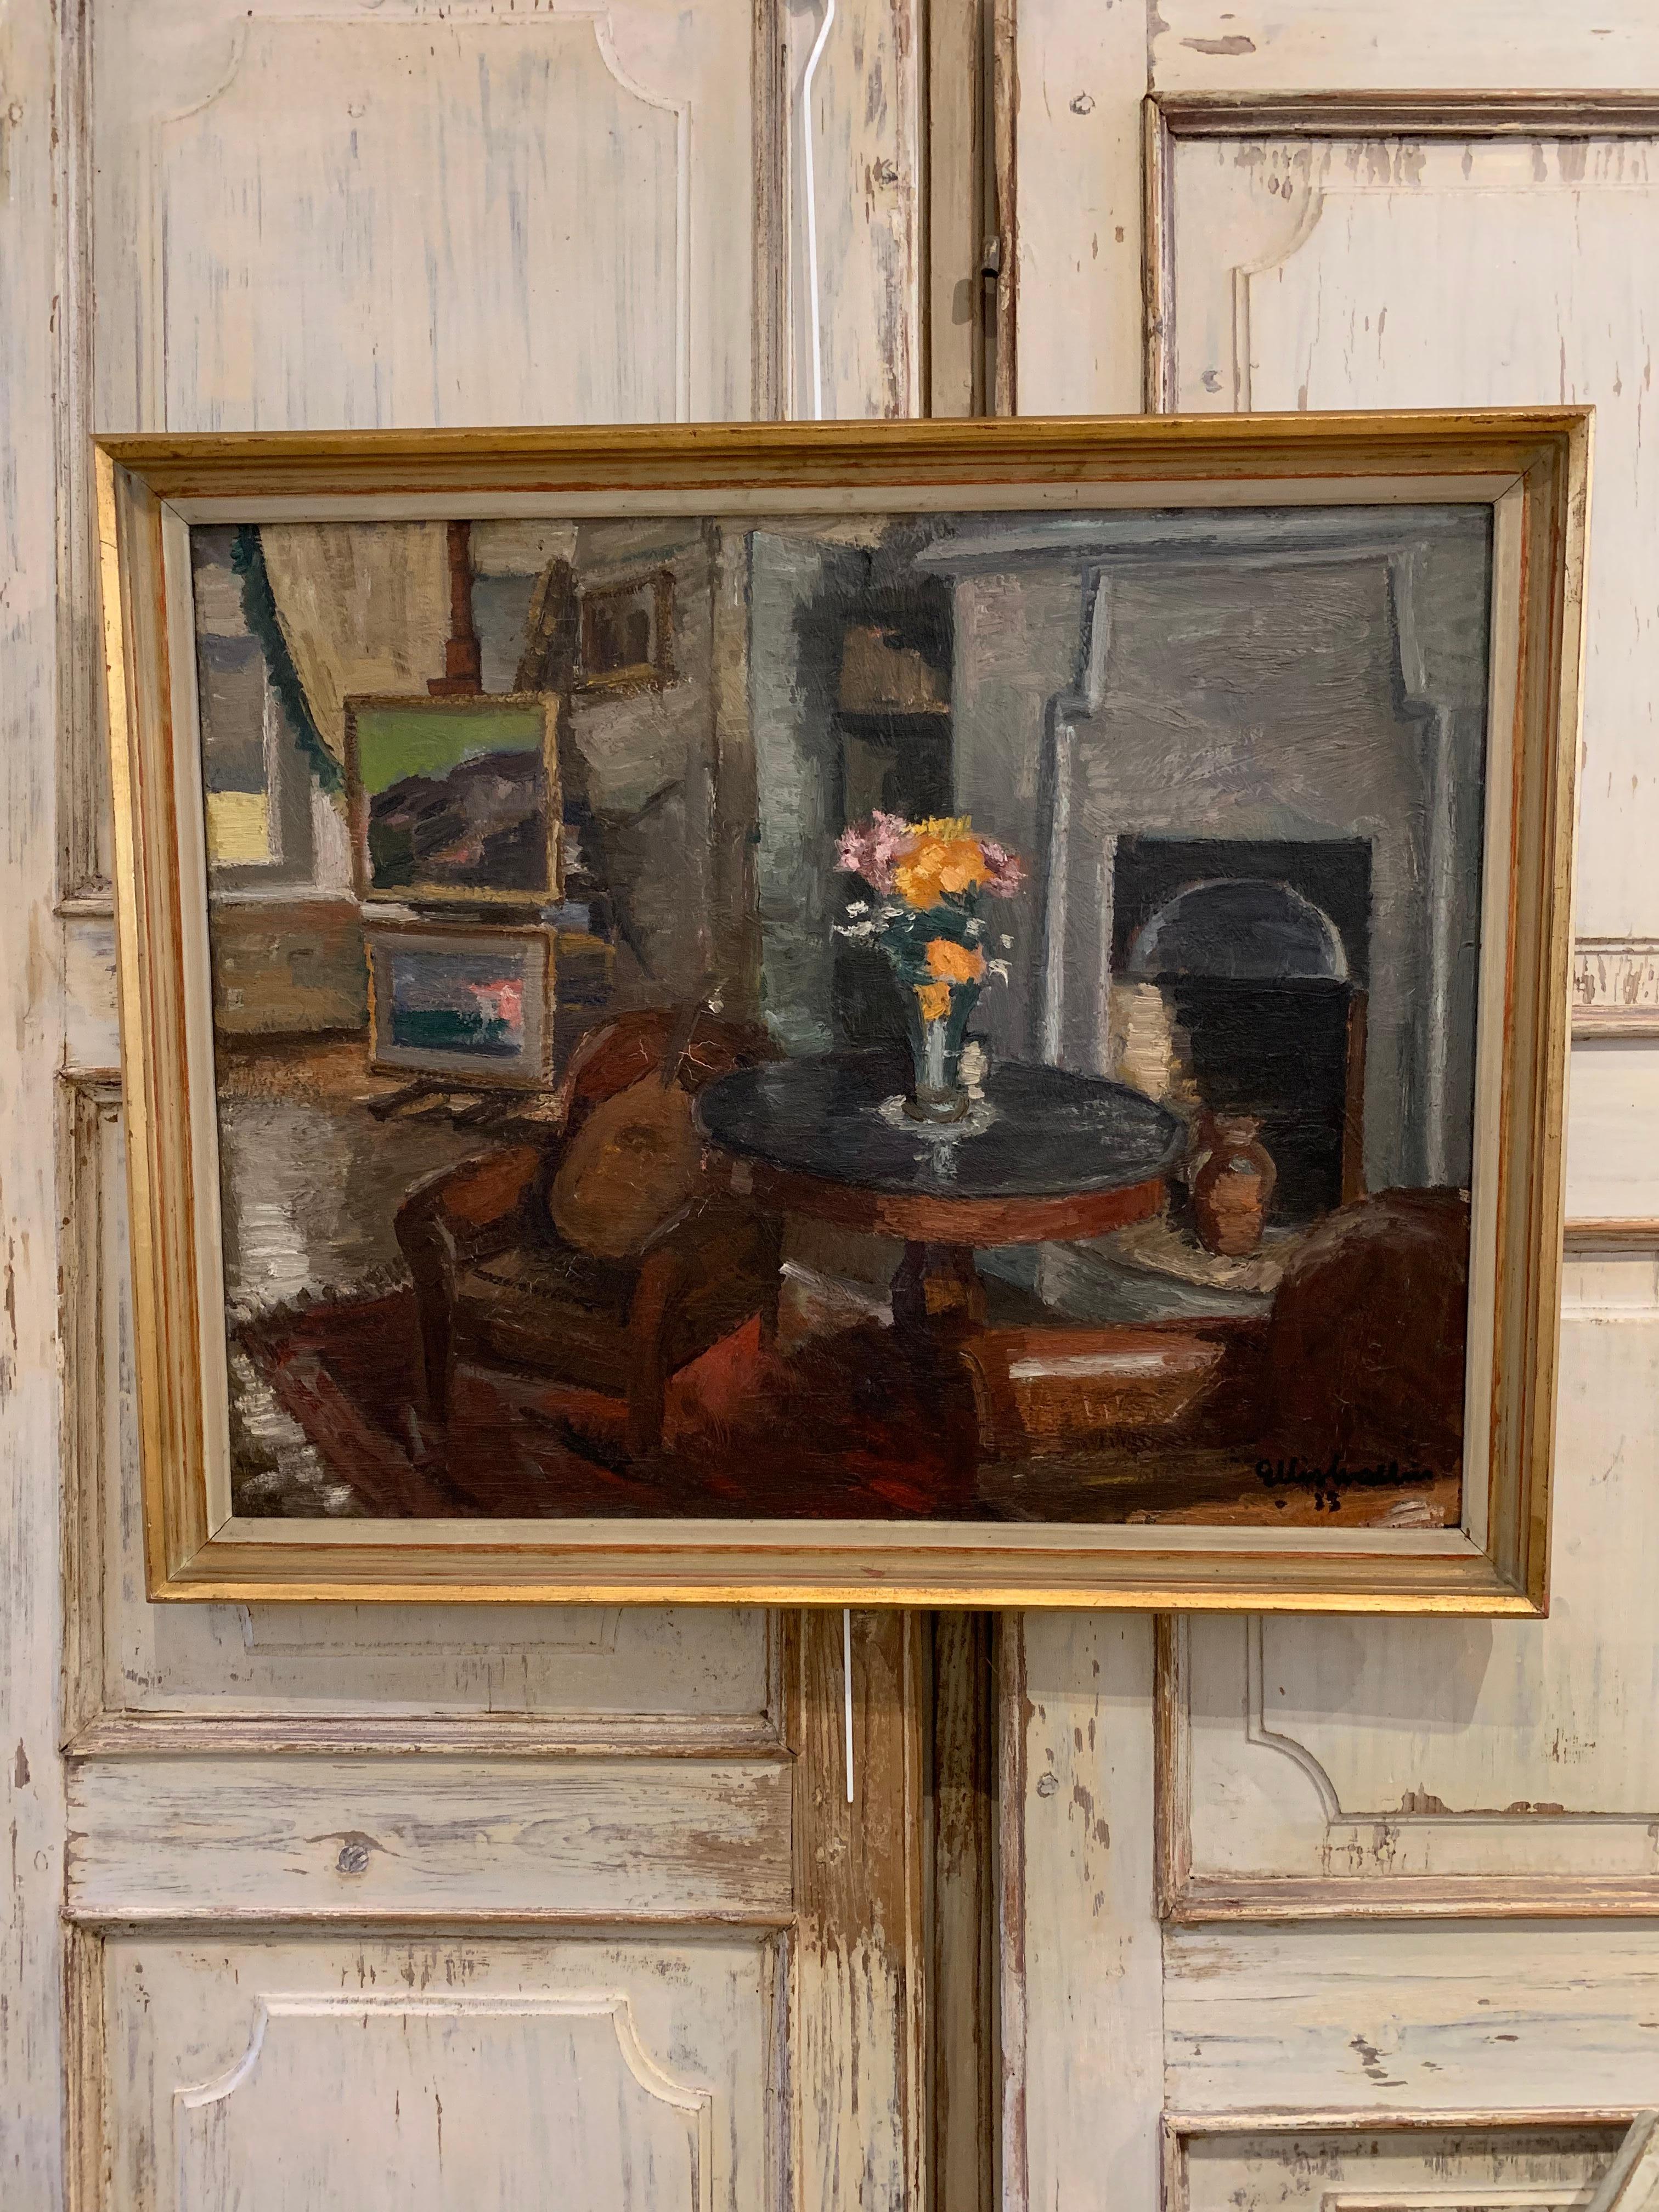 Painted by Swedish artist Ellis Wallin this framed oil on canvas shows a charming study of an interior.
The room in the foreground shows a fireside scene, a comfortable pair of leather chairs a stringed instrument casually laid on one by a classic